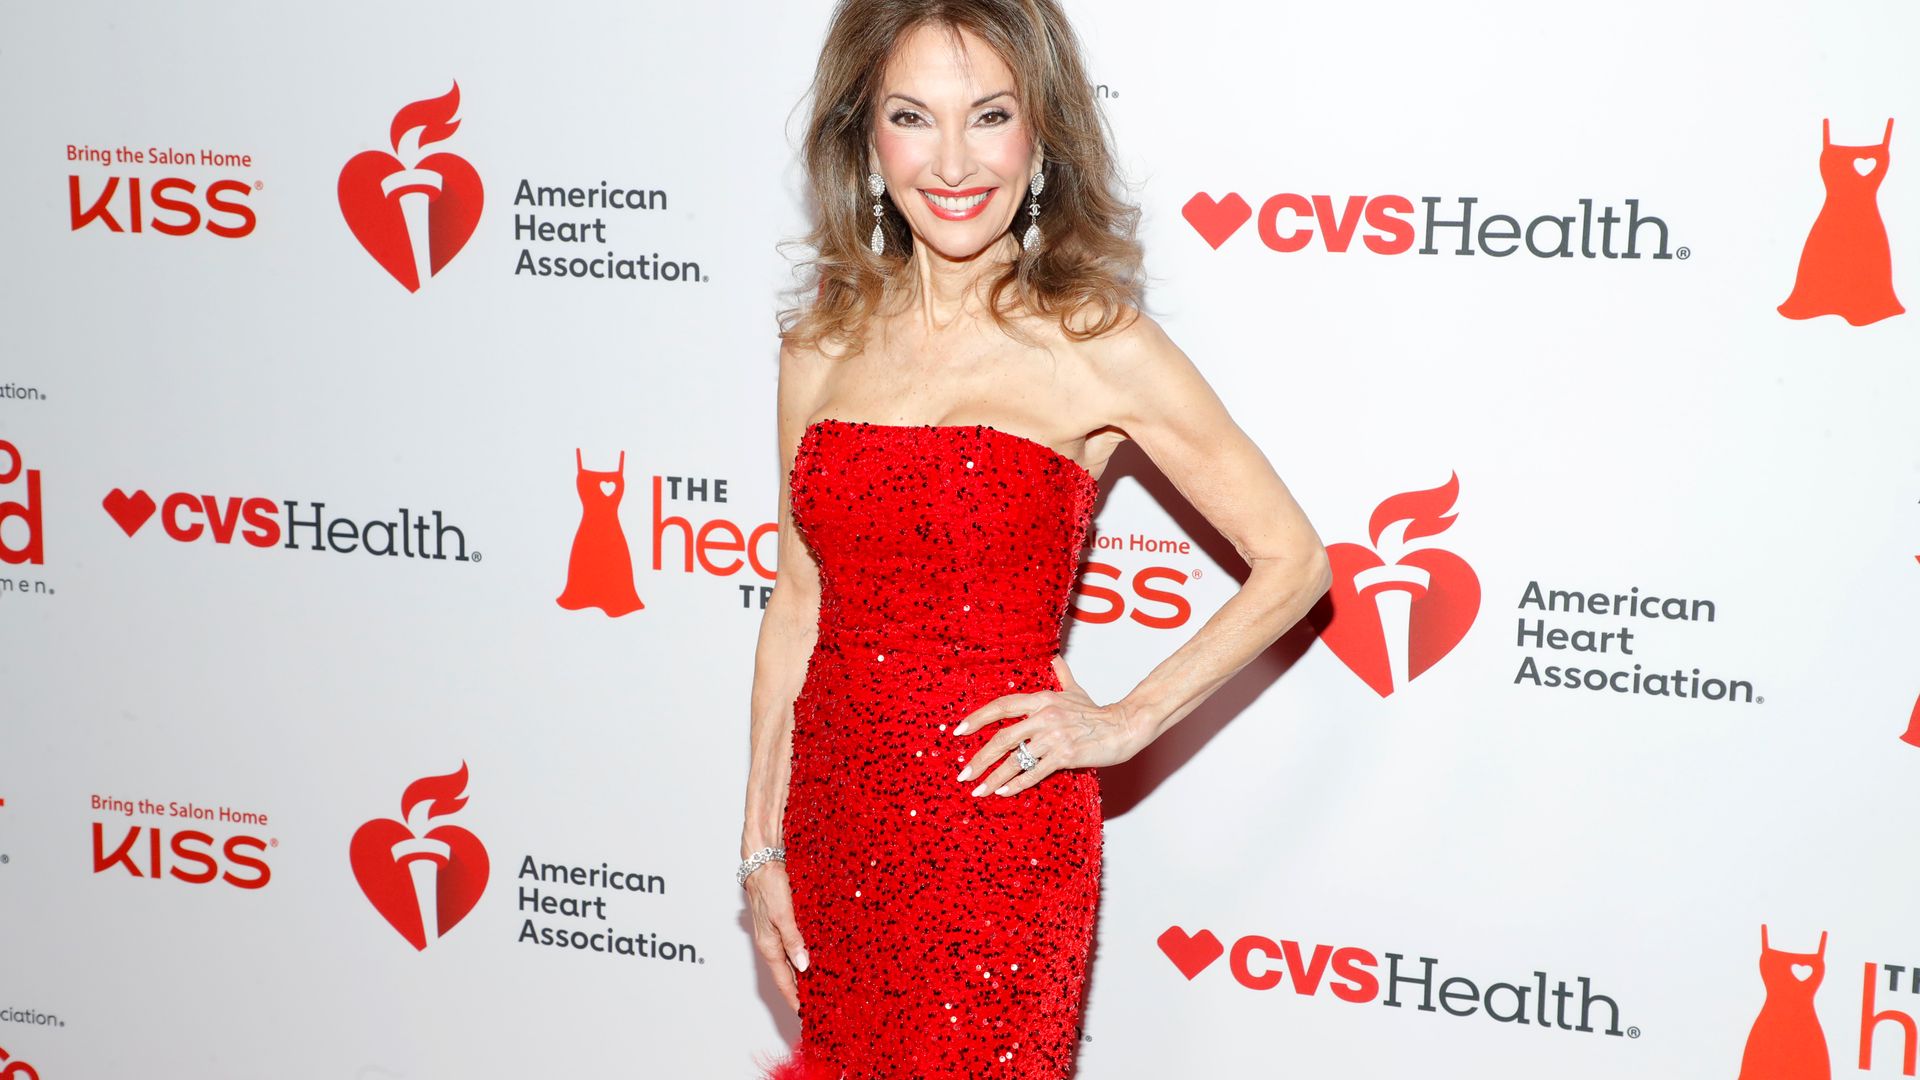 Susan Lucci, 77, turns heads in strapless gown for rare red carpet appearance in NYC